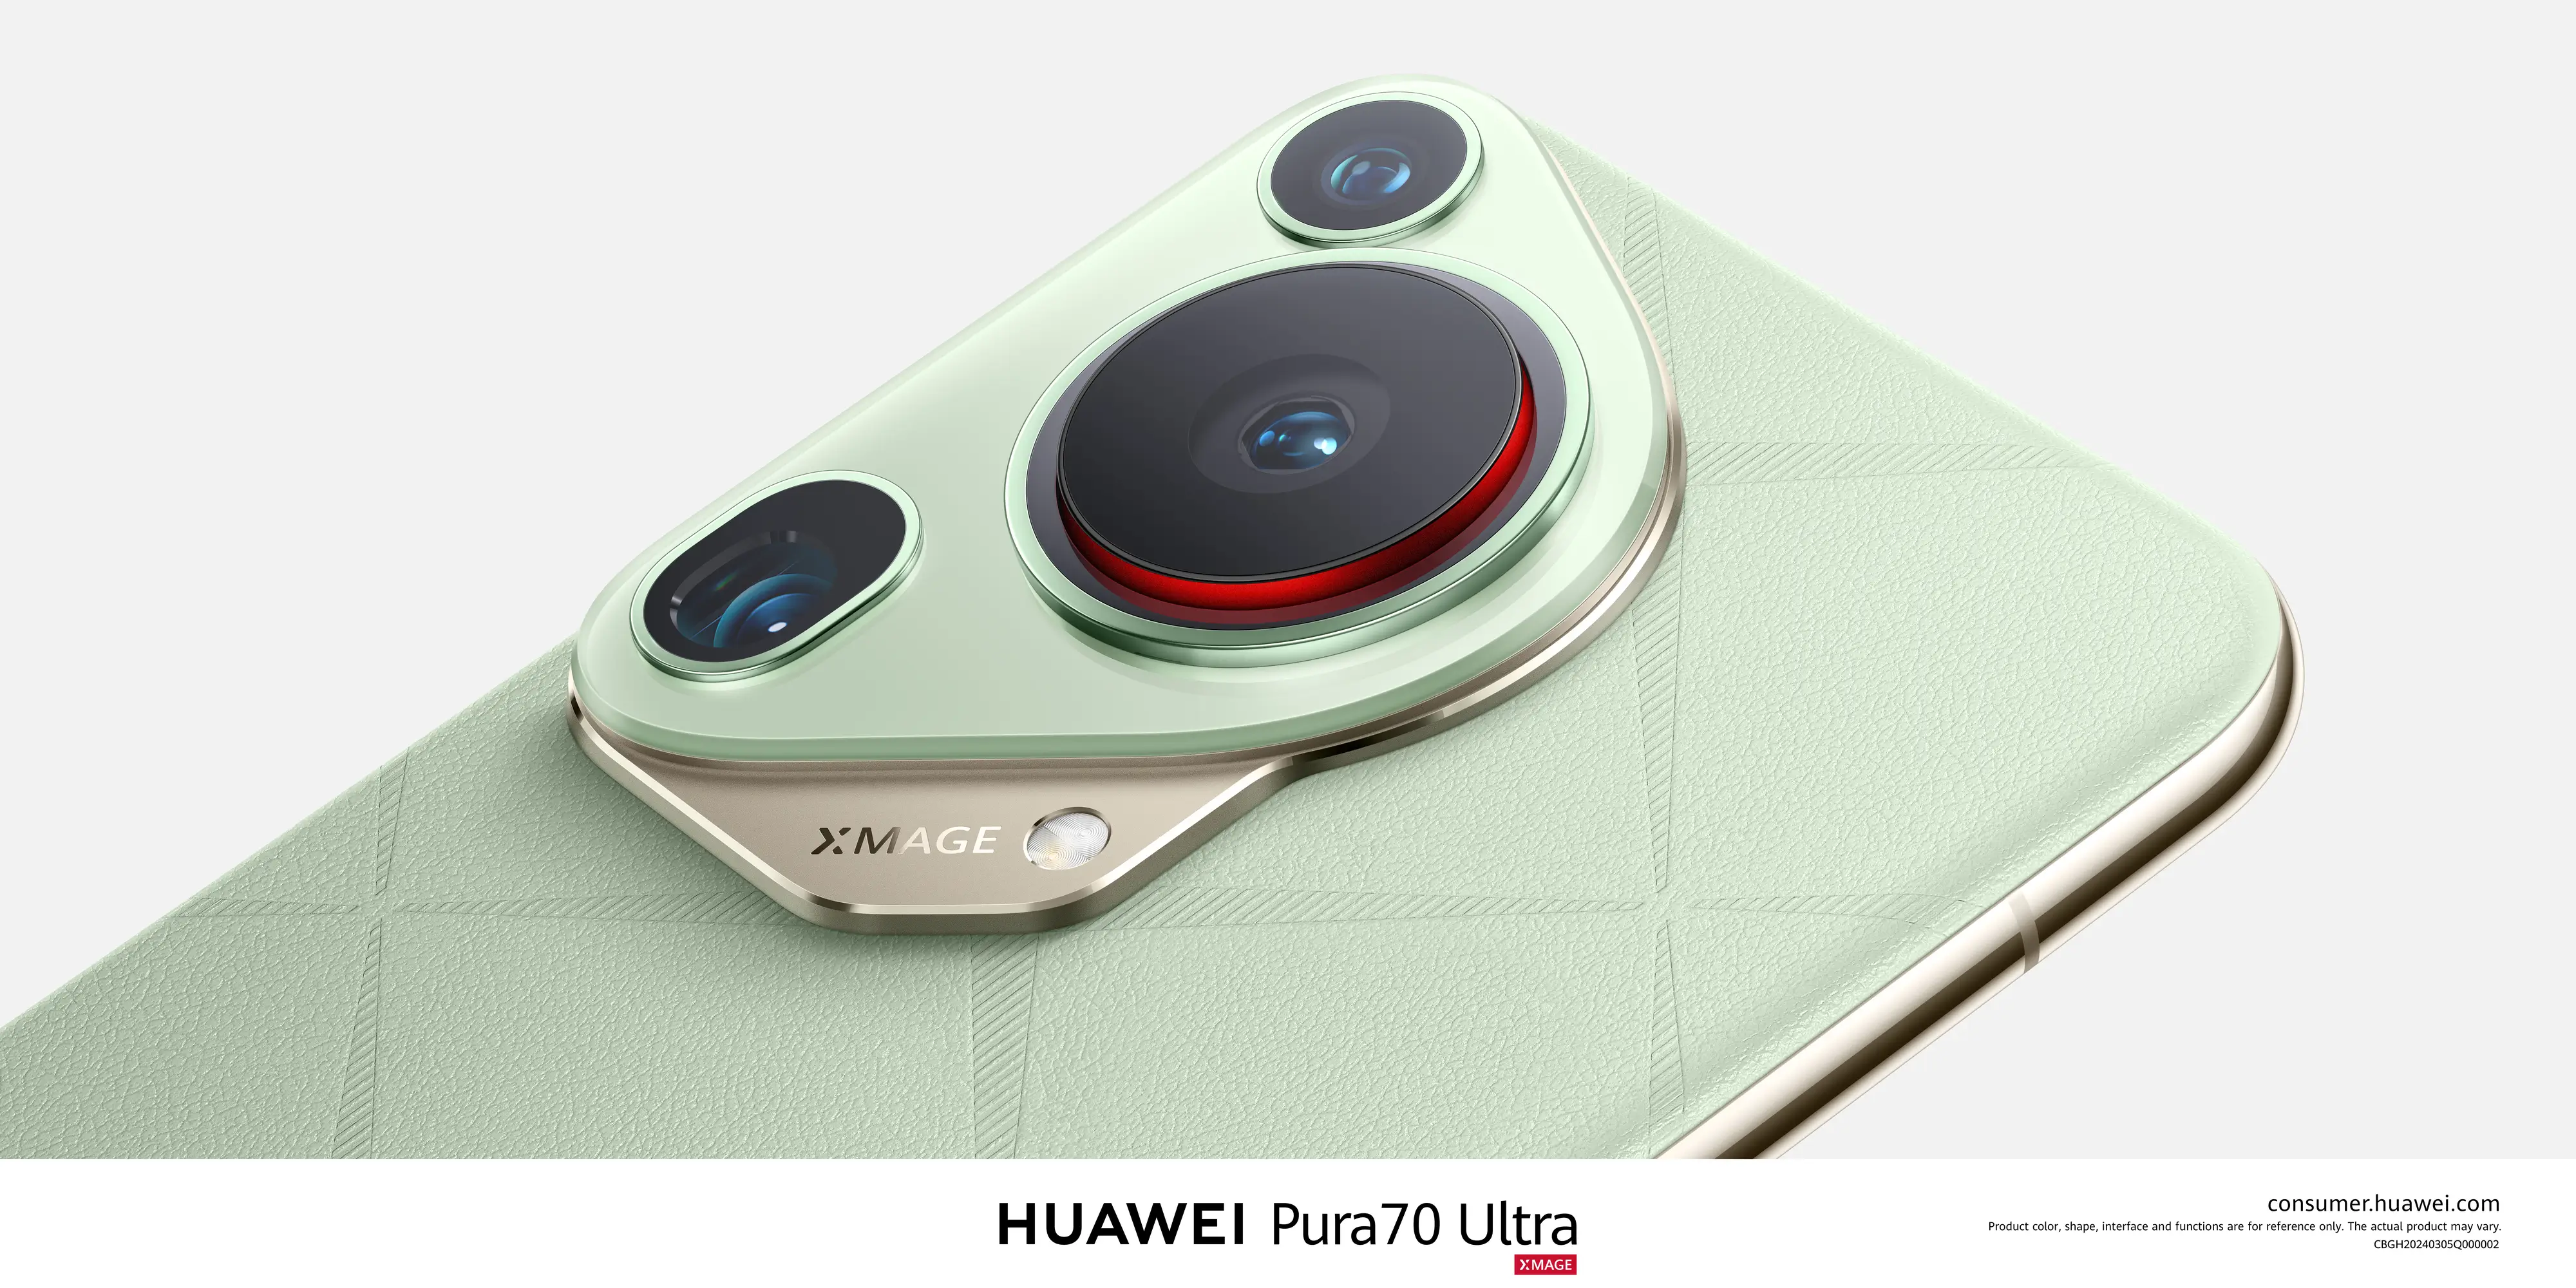 The Huawei Pura 70 Ultra is the best camera phone out there right now